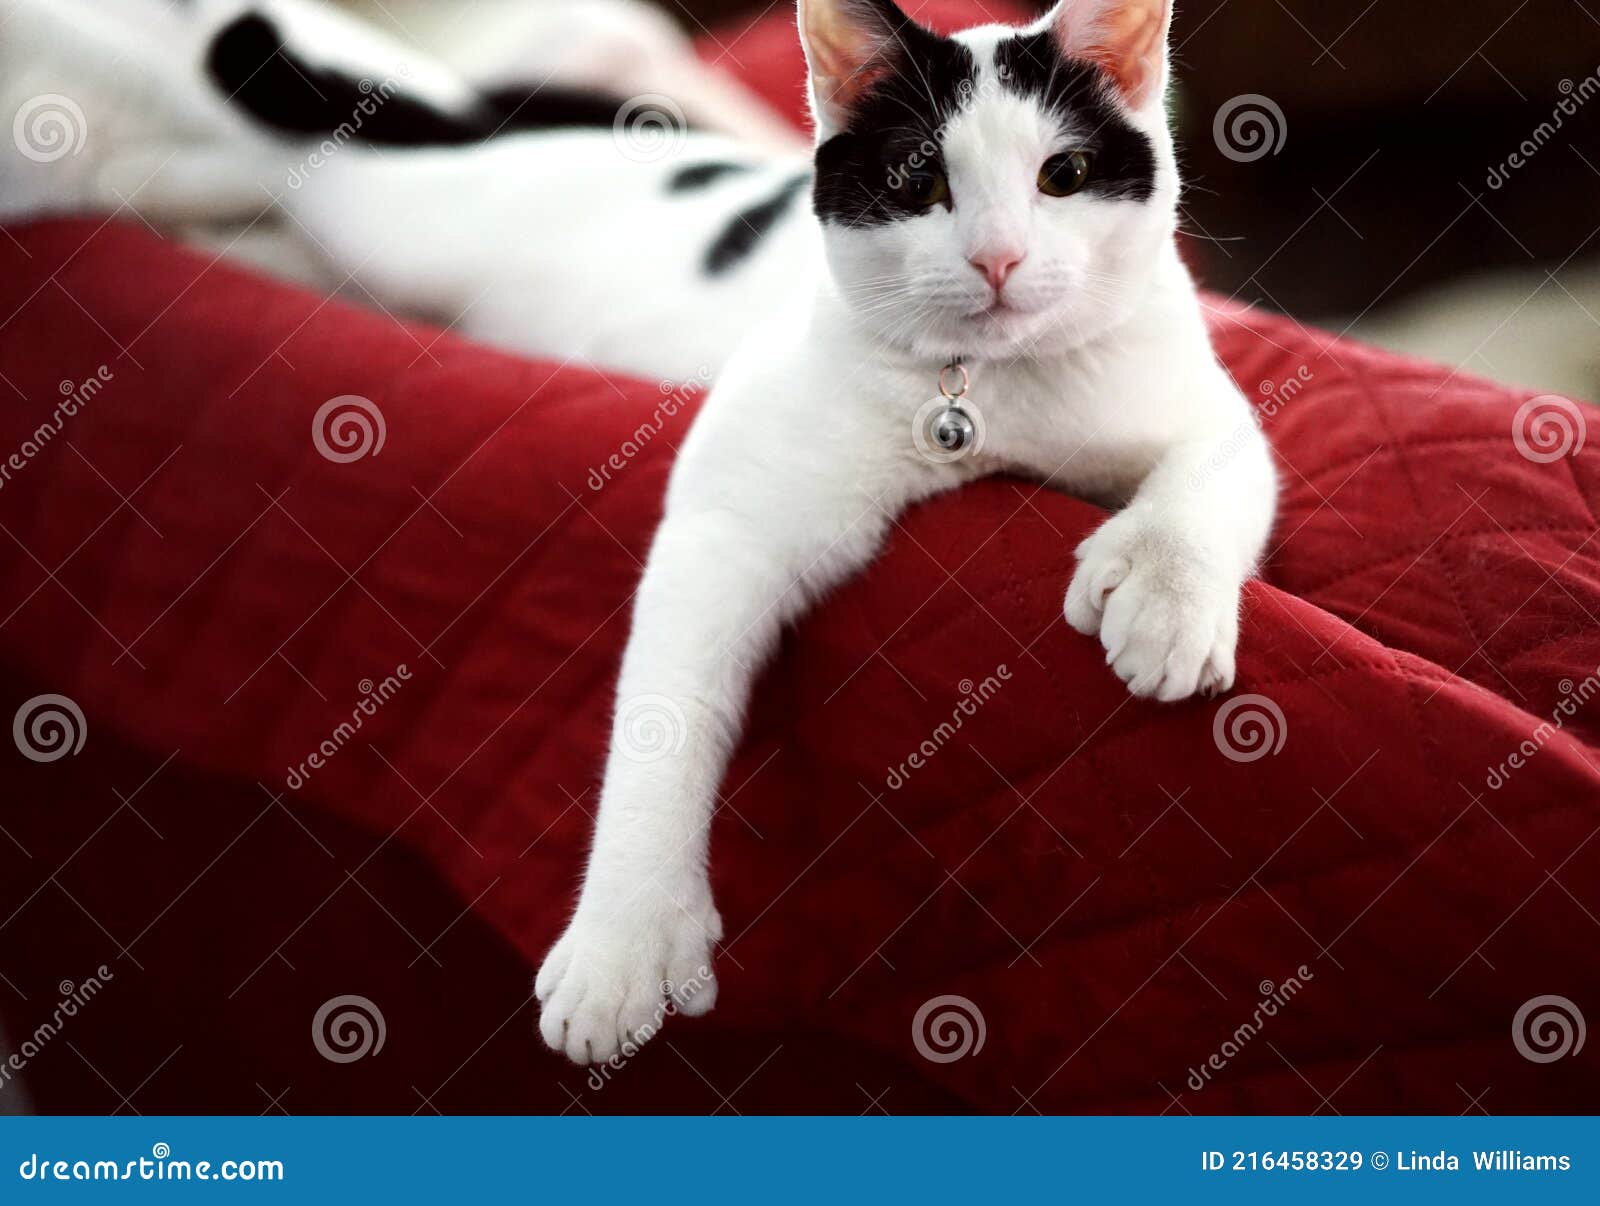 black and white polydactyl cat is athletic